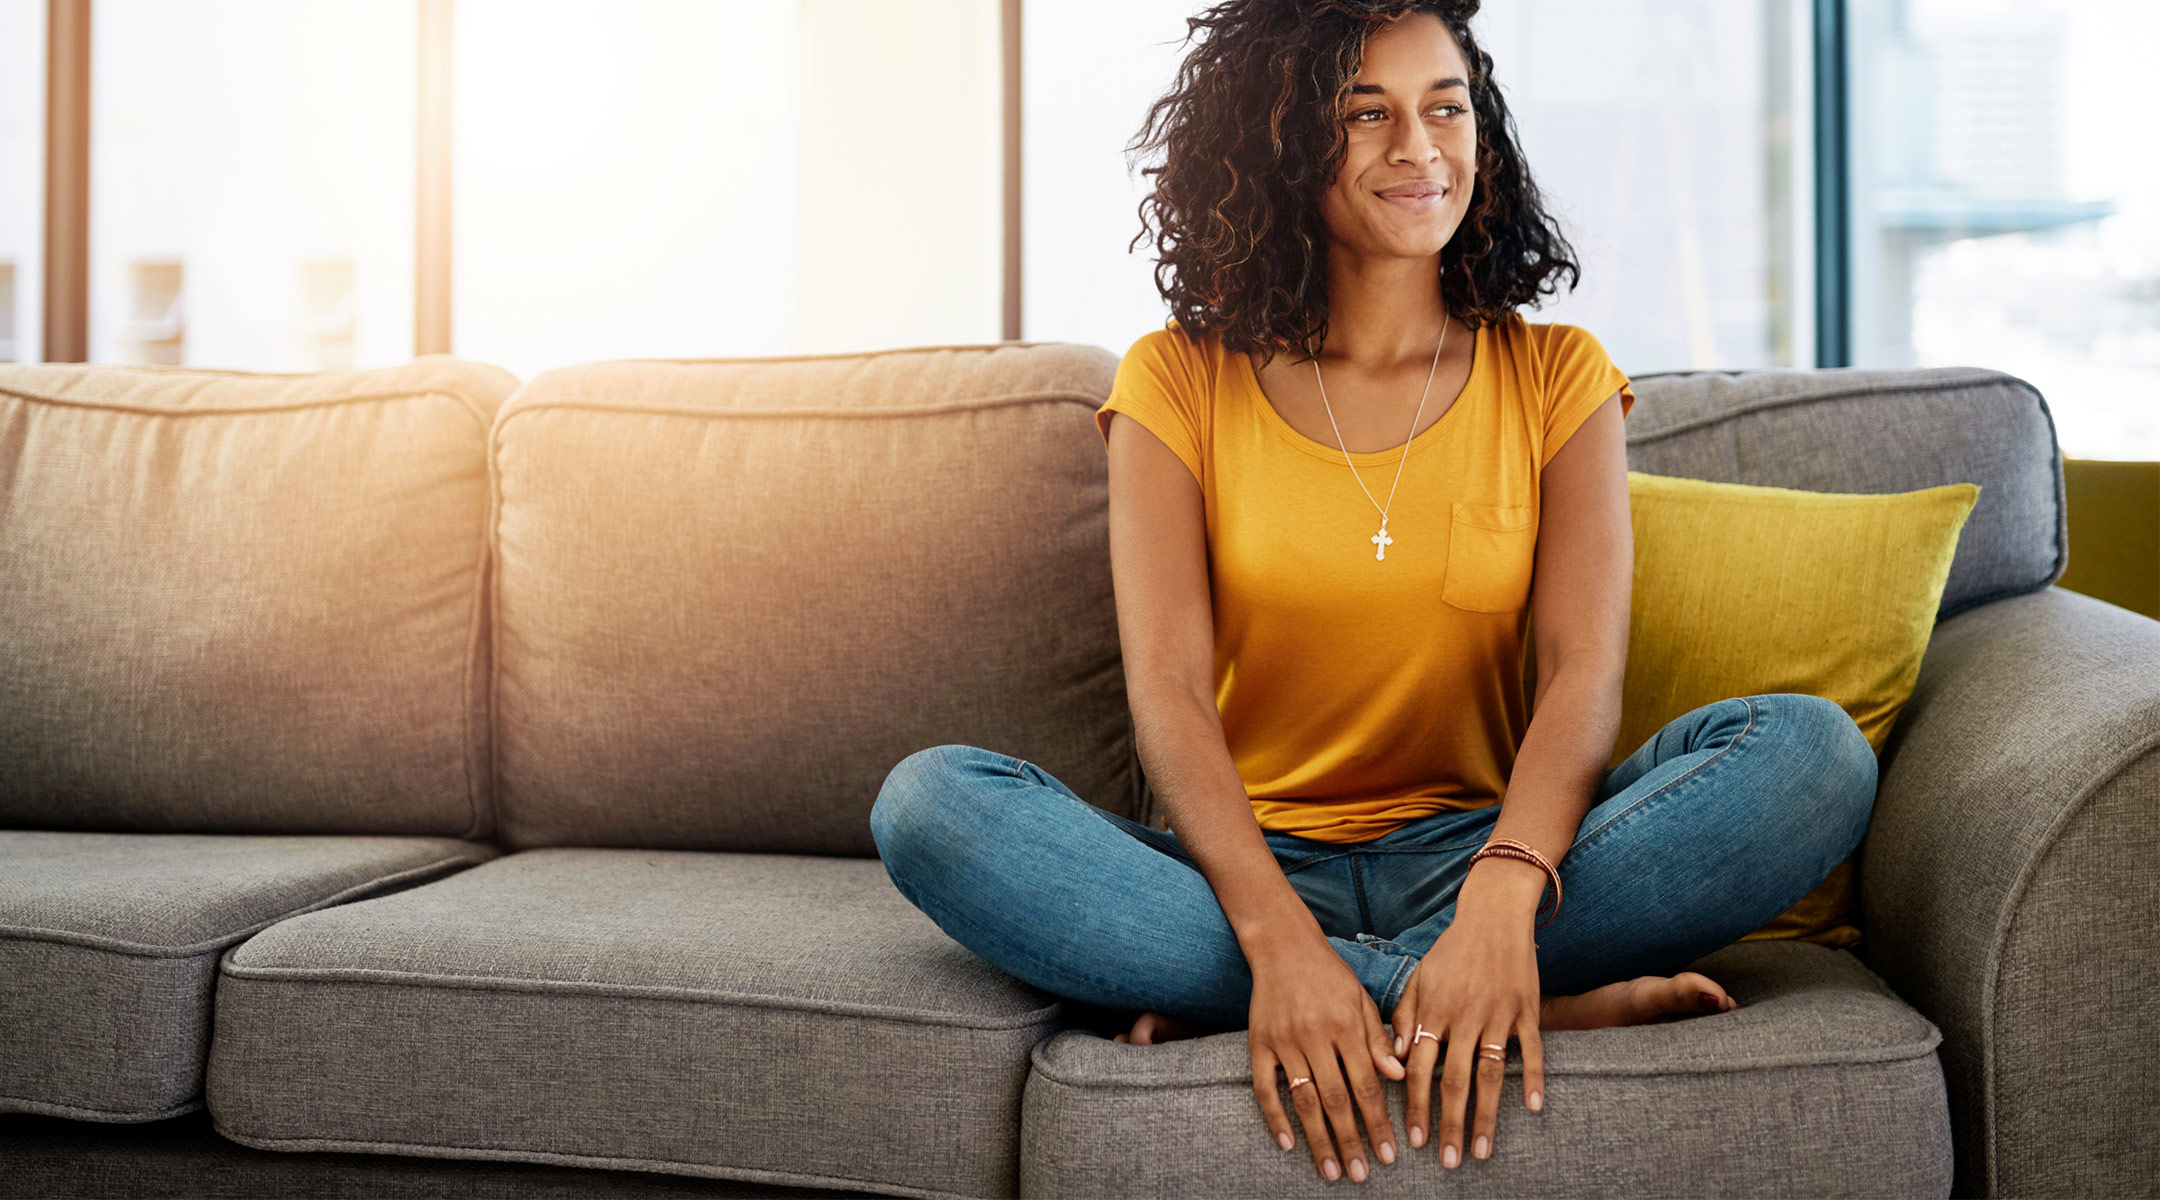 woman smiling and sitting on couch